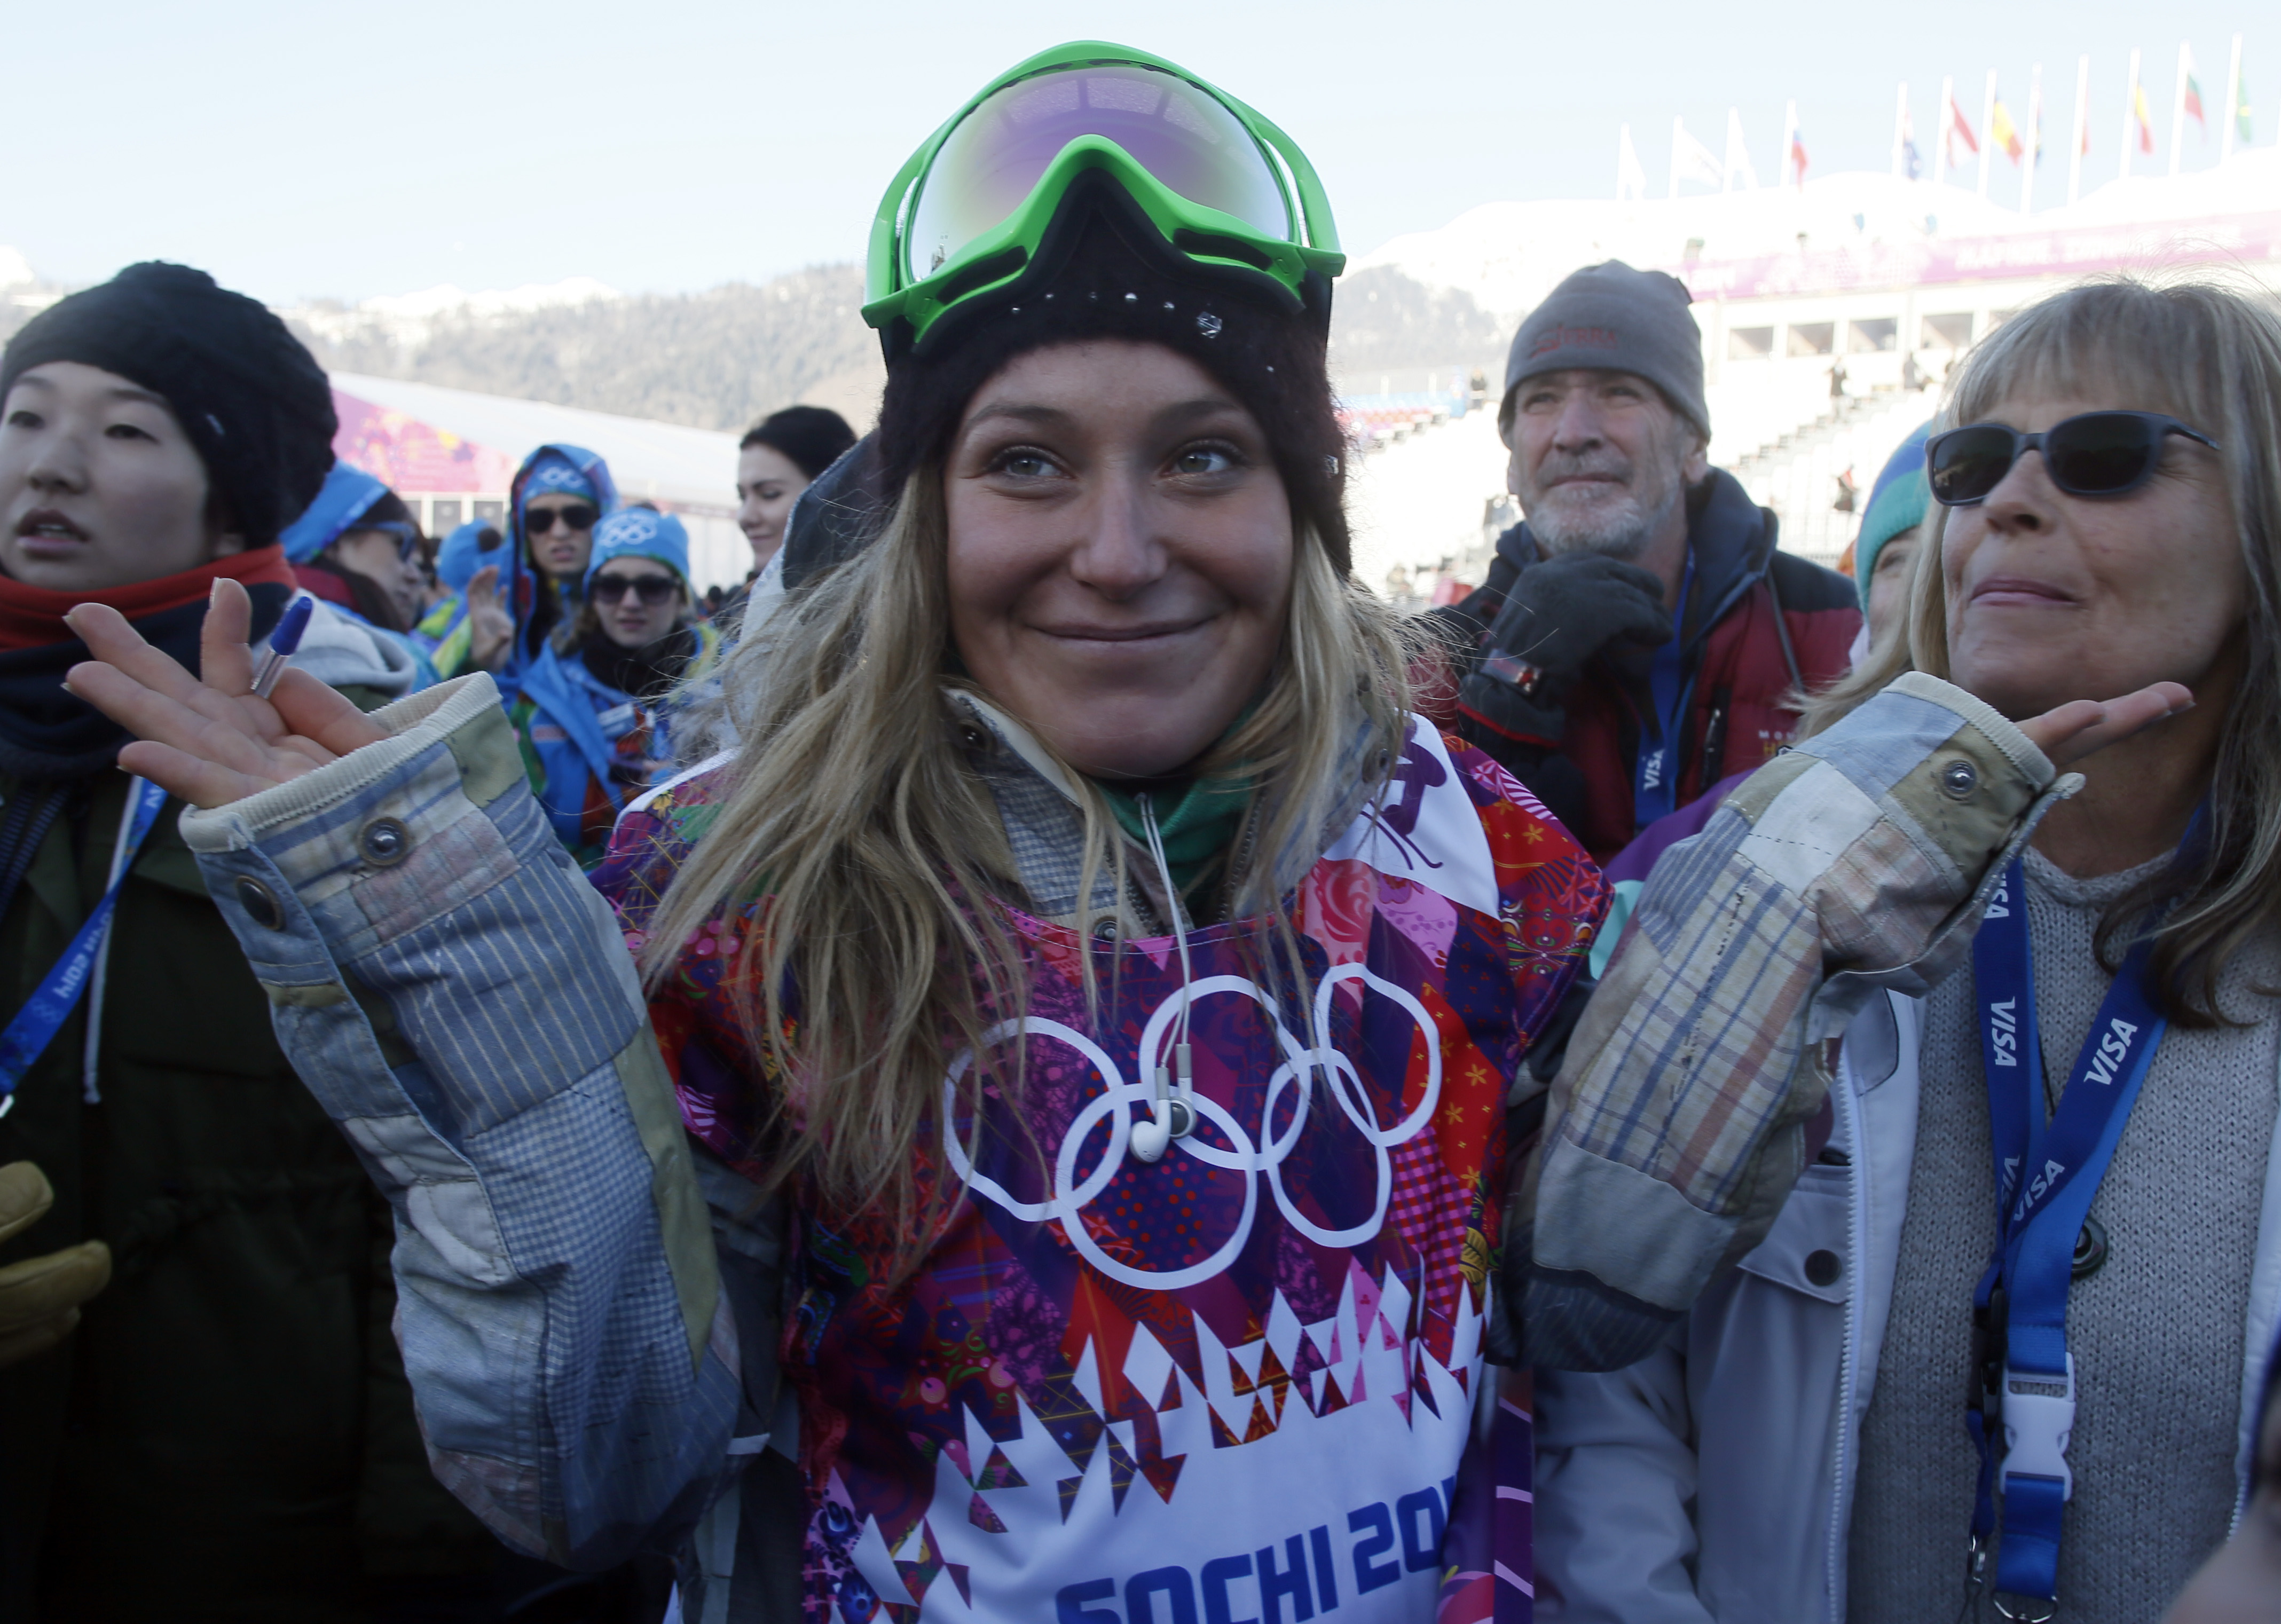 Jamie Anderson after ladies slopestyle qualification in the Sochi 2014 Olympic Winter Games at Rosa Khutor Extreme Park. (Nathan Bilow, USA TODAY Sports)